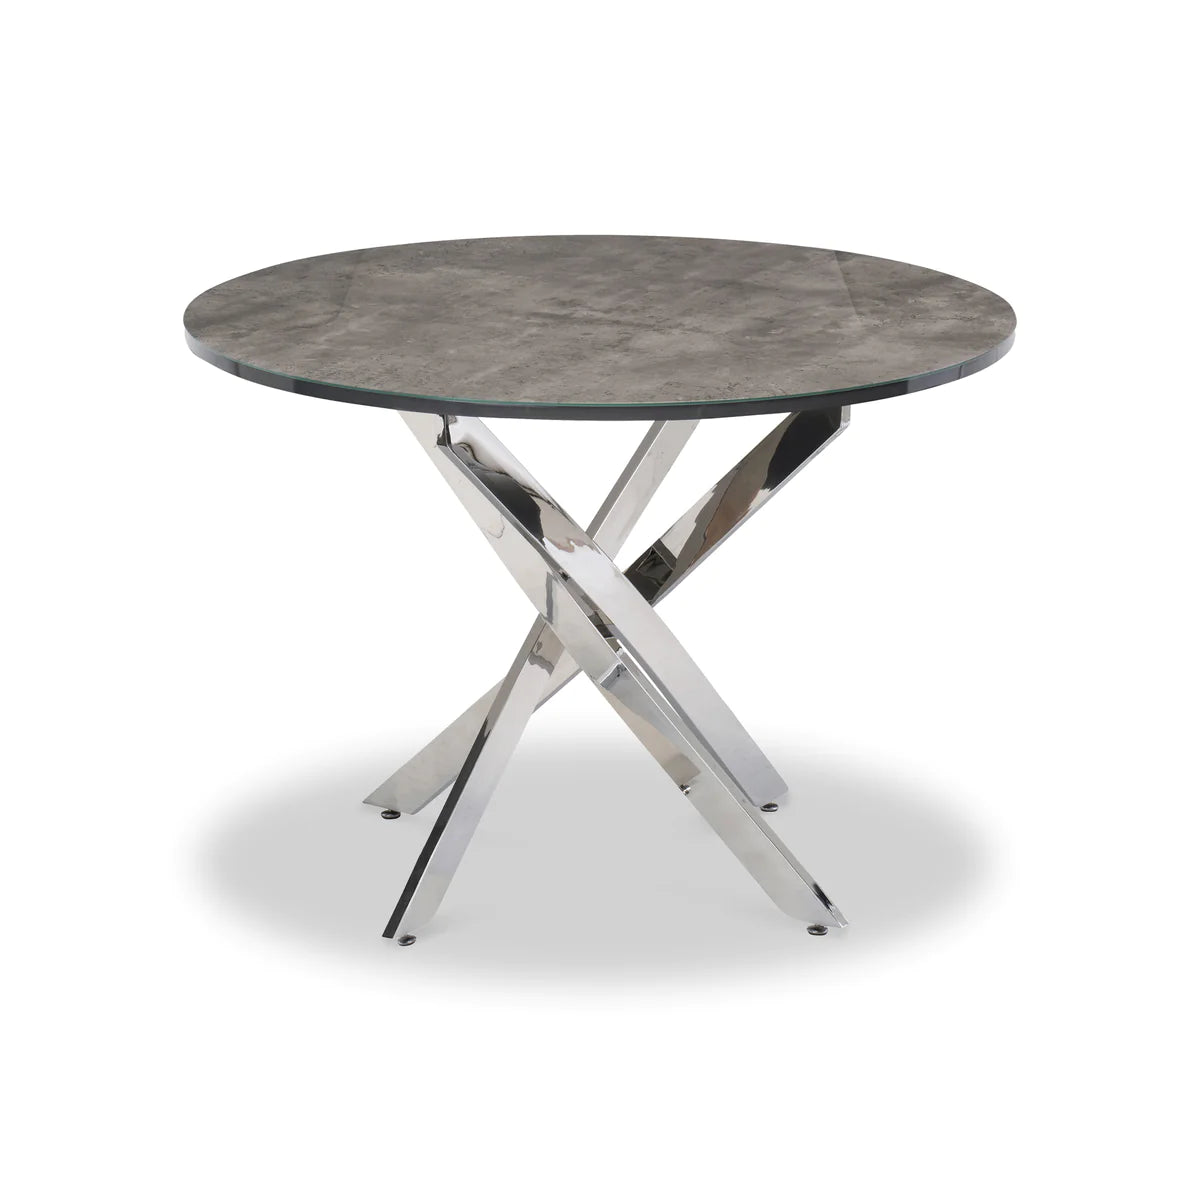 Carlow Round Dining Table - Charcoal